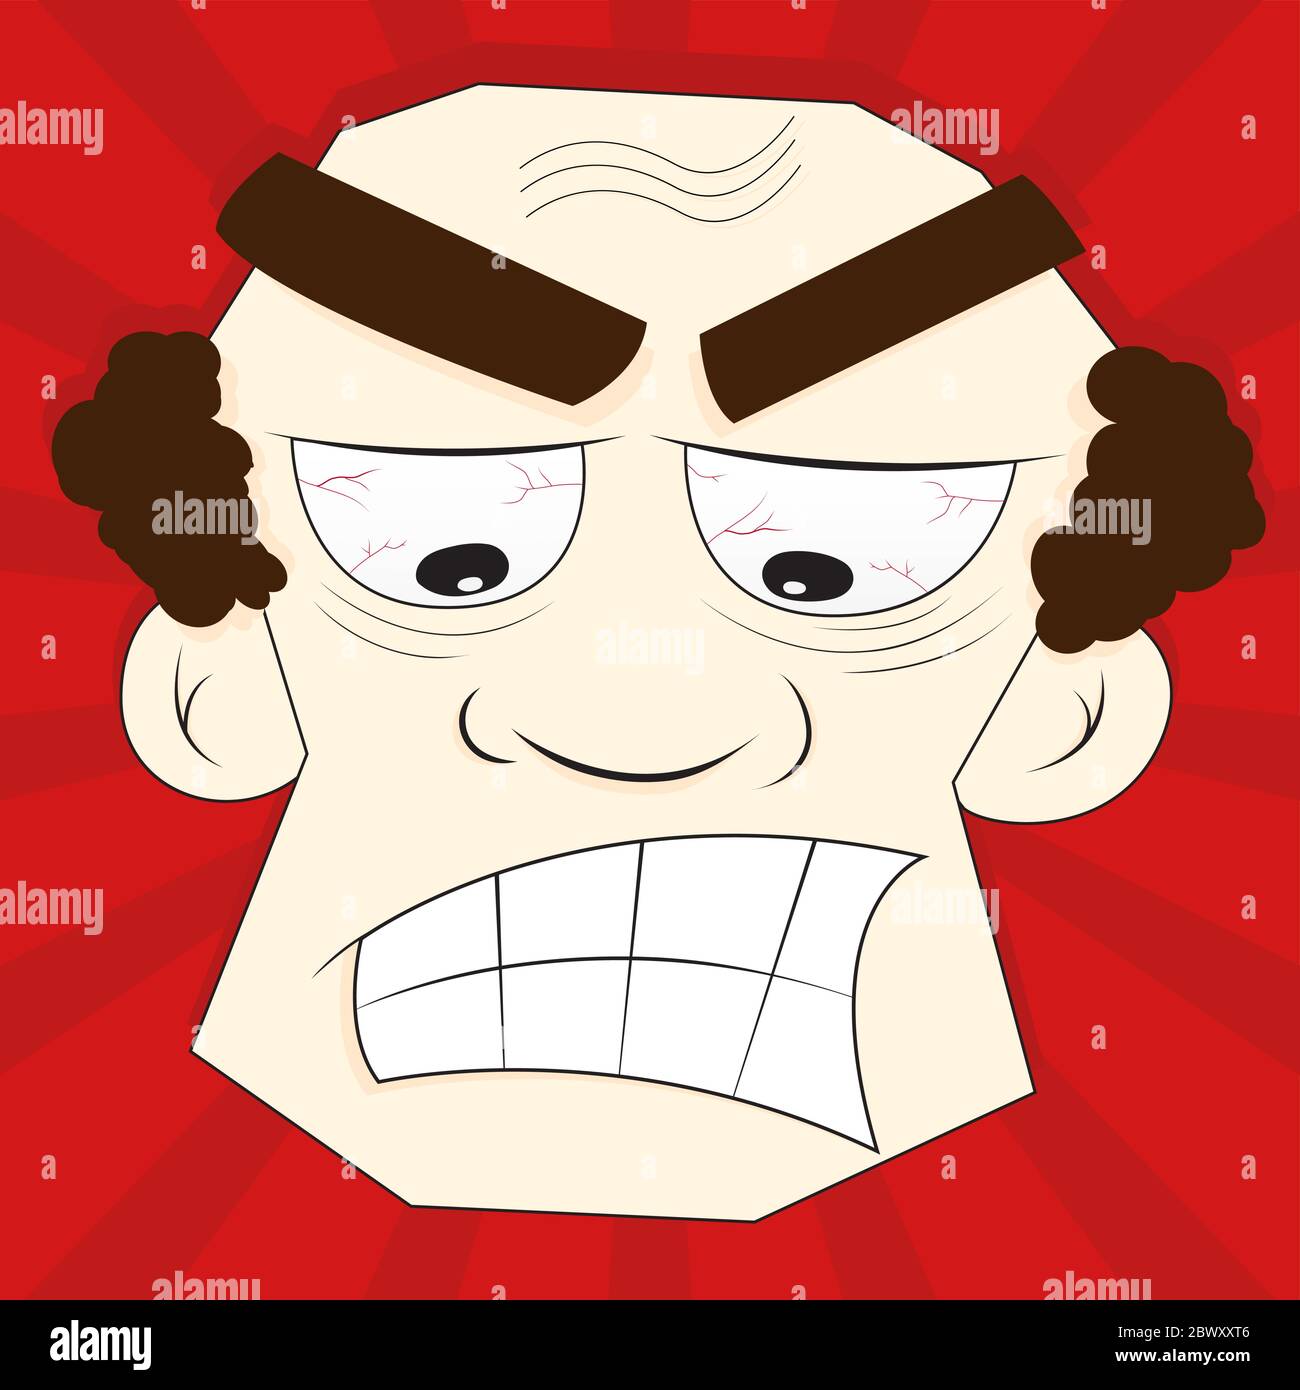 Face of an angry and irritated cartoon man. Stock Vector